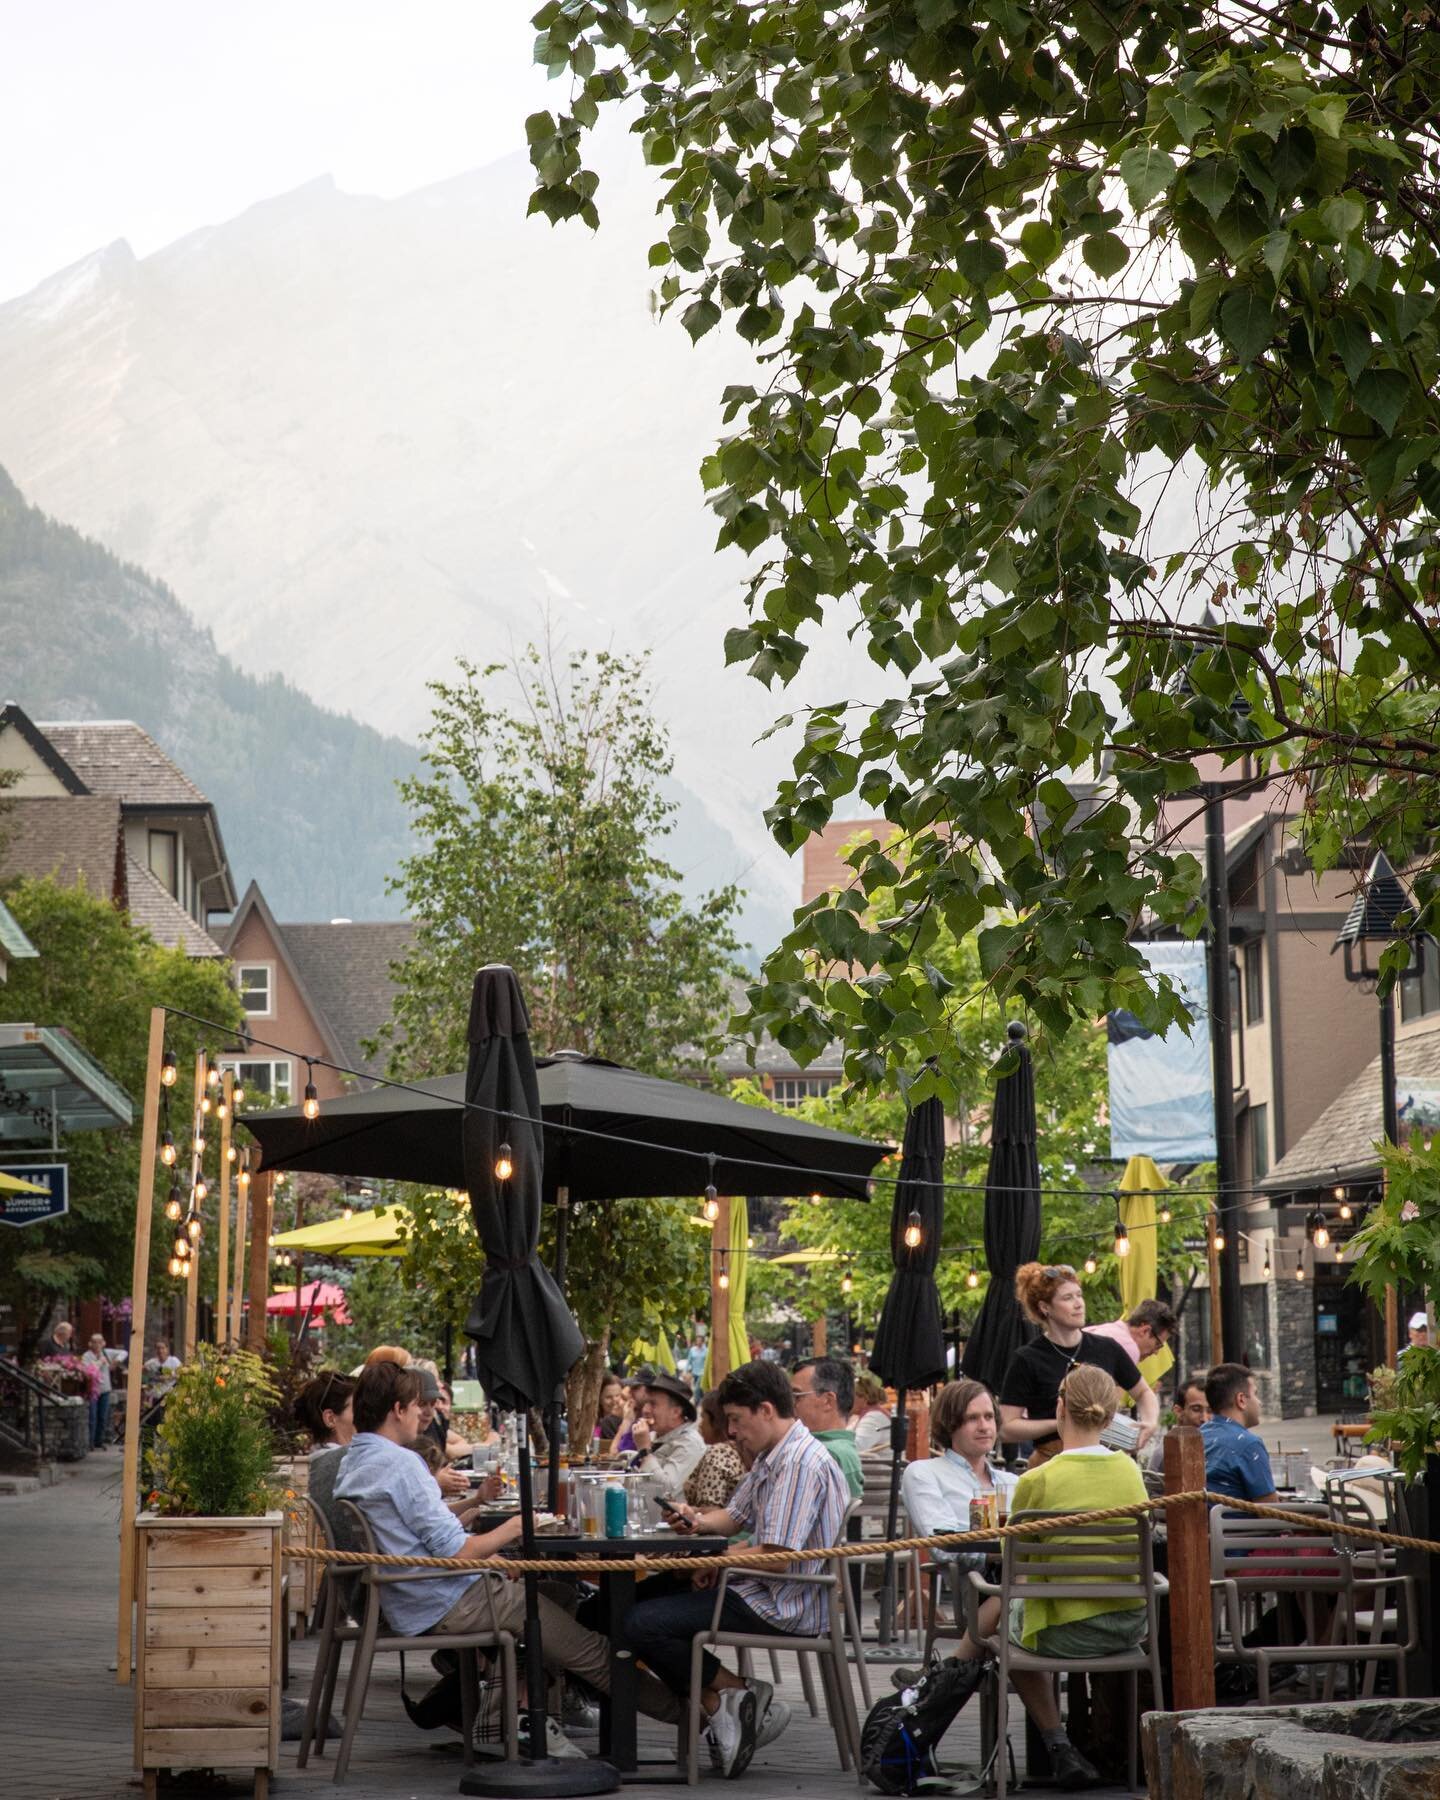 Join us on one of our two beautiful patios this summer - doggos welcome. 

Link in bio to reserve.

#patio #summerpatio #banff #banffnationalpark #bearstreet #mybanff #dogfriendly #bearstreettavern